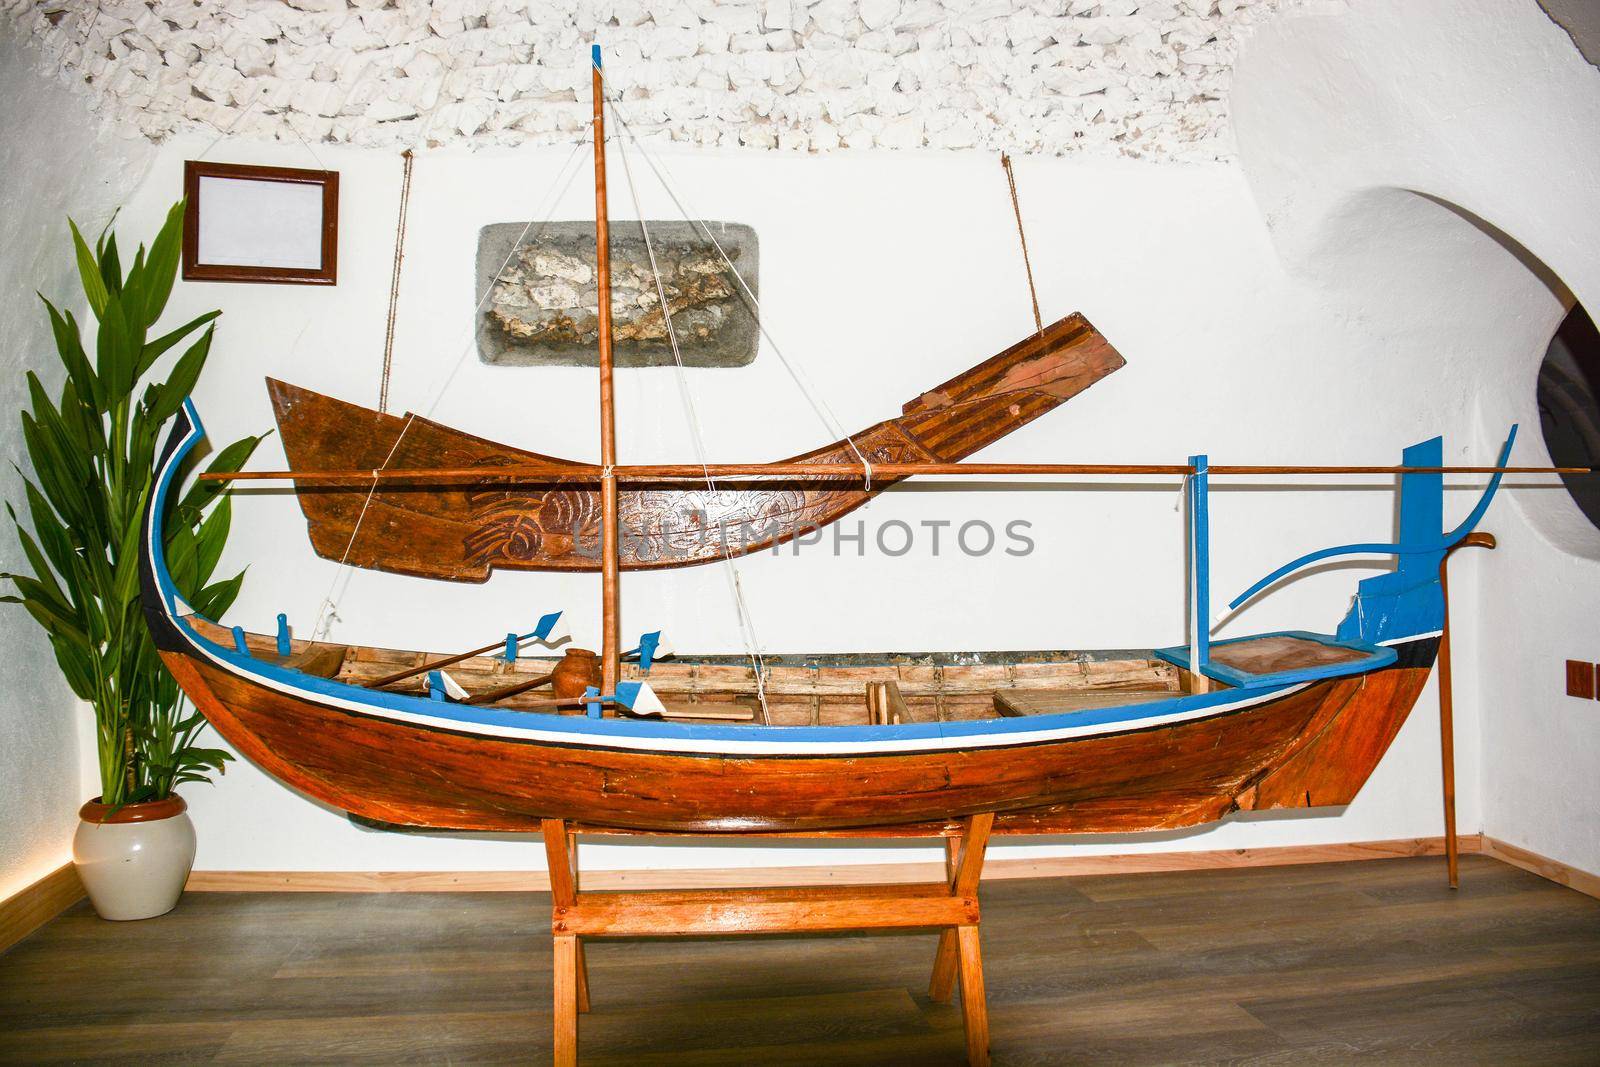 maldives, a typical Maldivian boat built entirely by hand with local wood found on the atolls